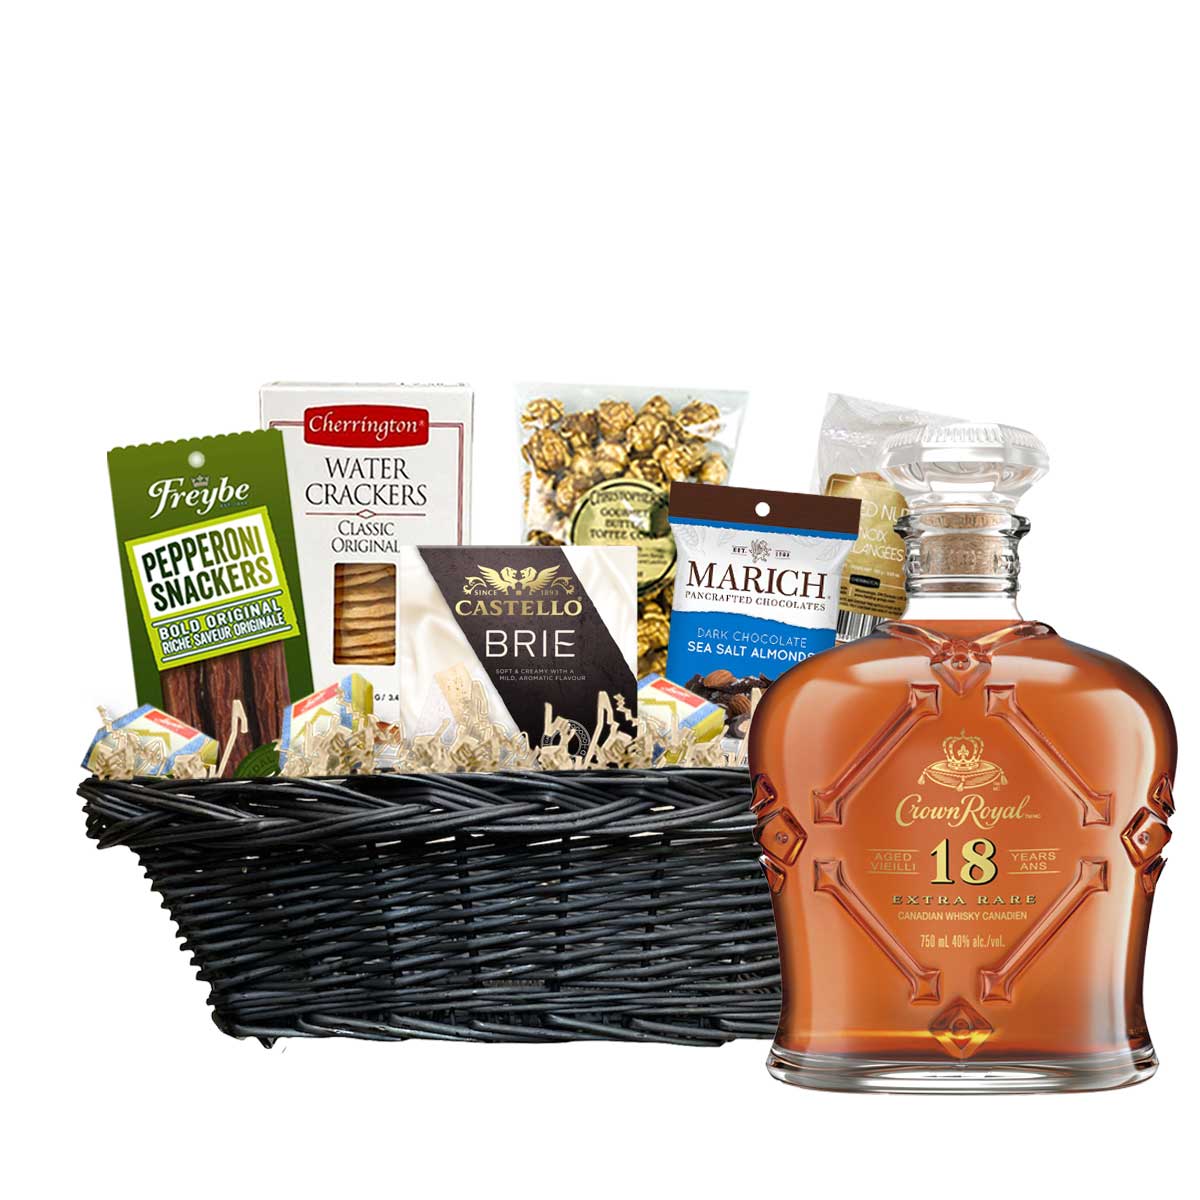 TAG Liquor Stores Canada Delivery-Crown Royal 18 Year Extra Rare Whisky 750ml Corporate Gift Basket-spirits-tagliquorstores.com